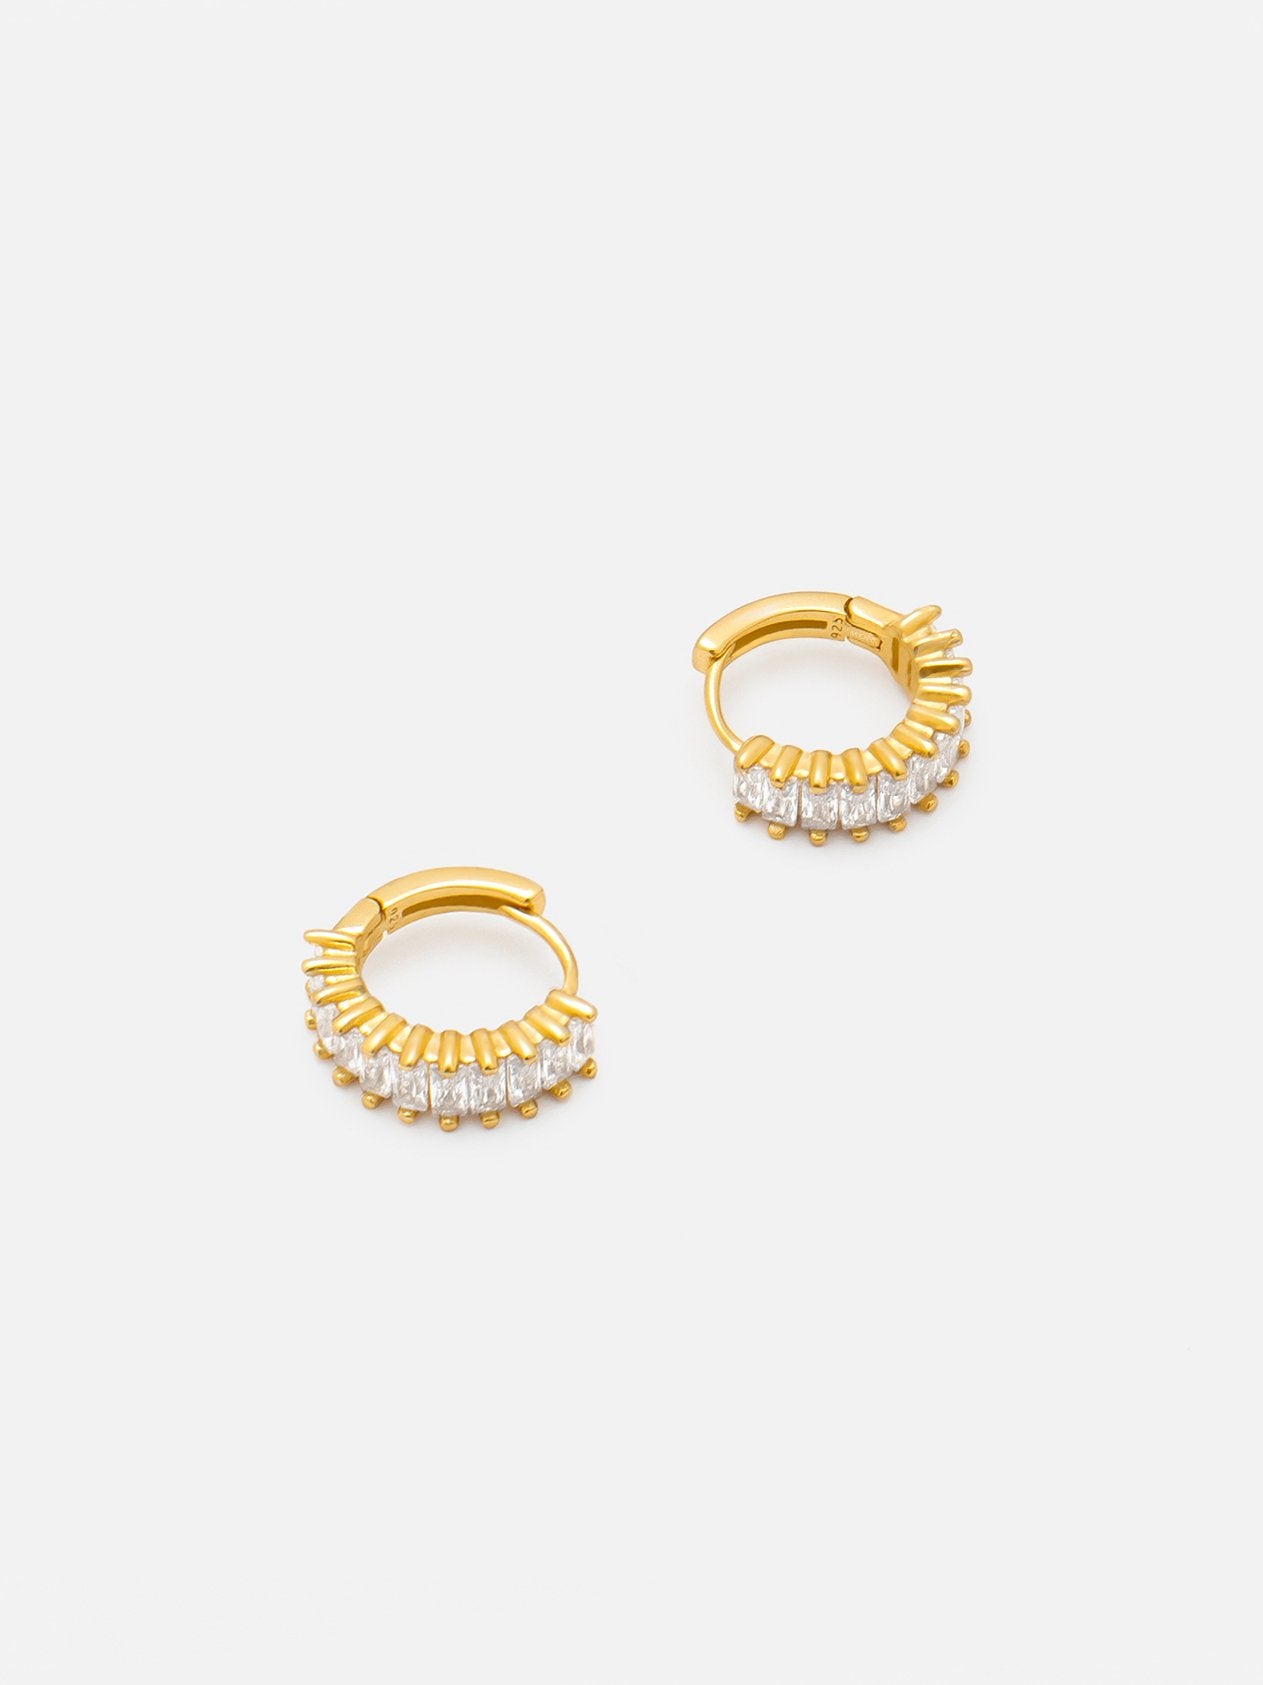 Small Gold Hoop Earrings With Baguette Stones (18ct Gold Plated 925 Sterling Silver) - Muchv Jewellery